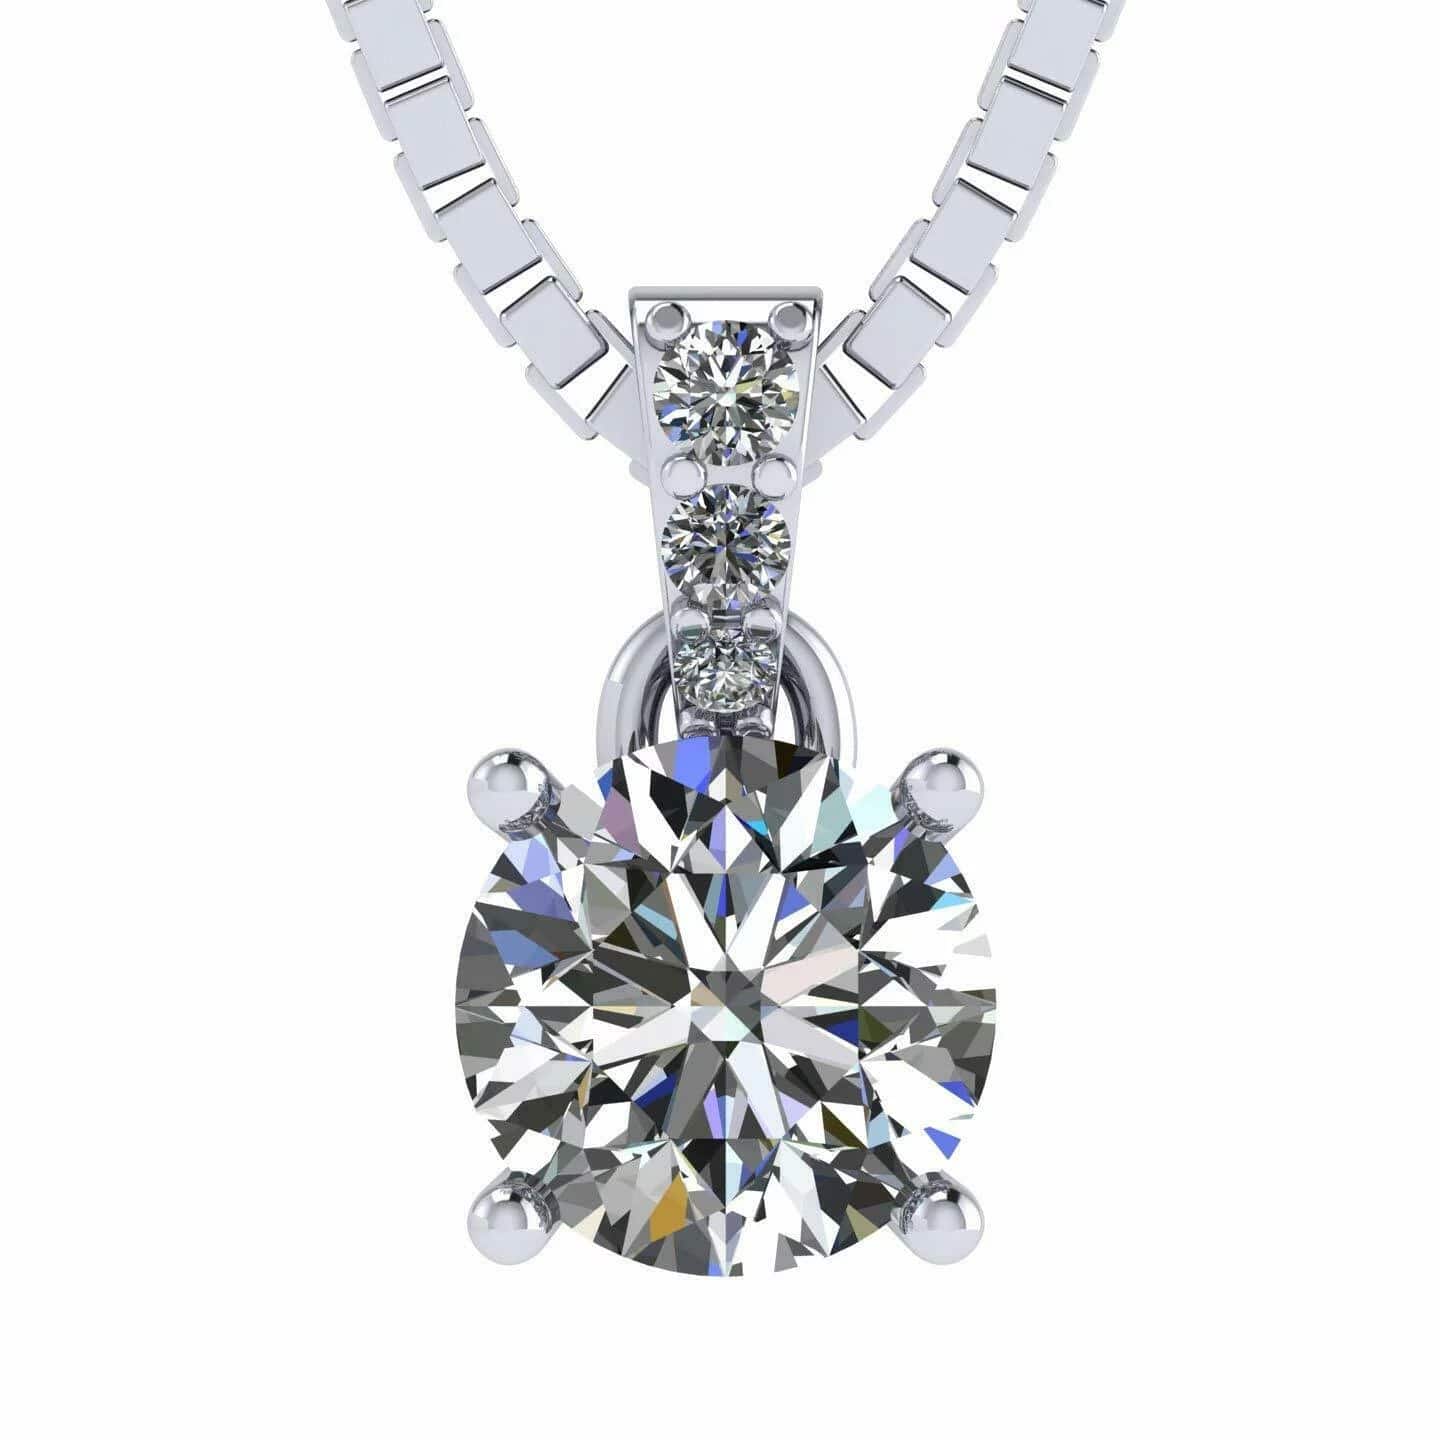  Sparkle with Sophistication: 1.00ct Simulated Diamond Necklace in Sterling Silver